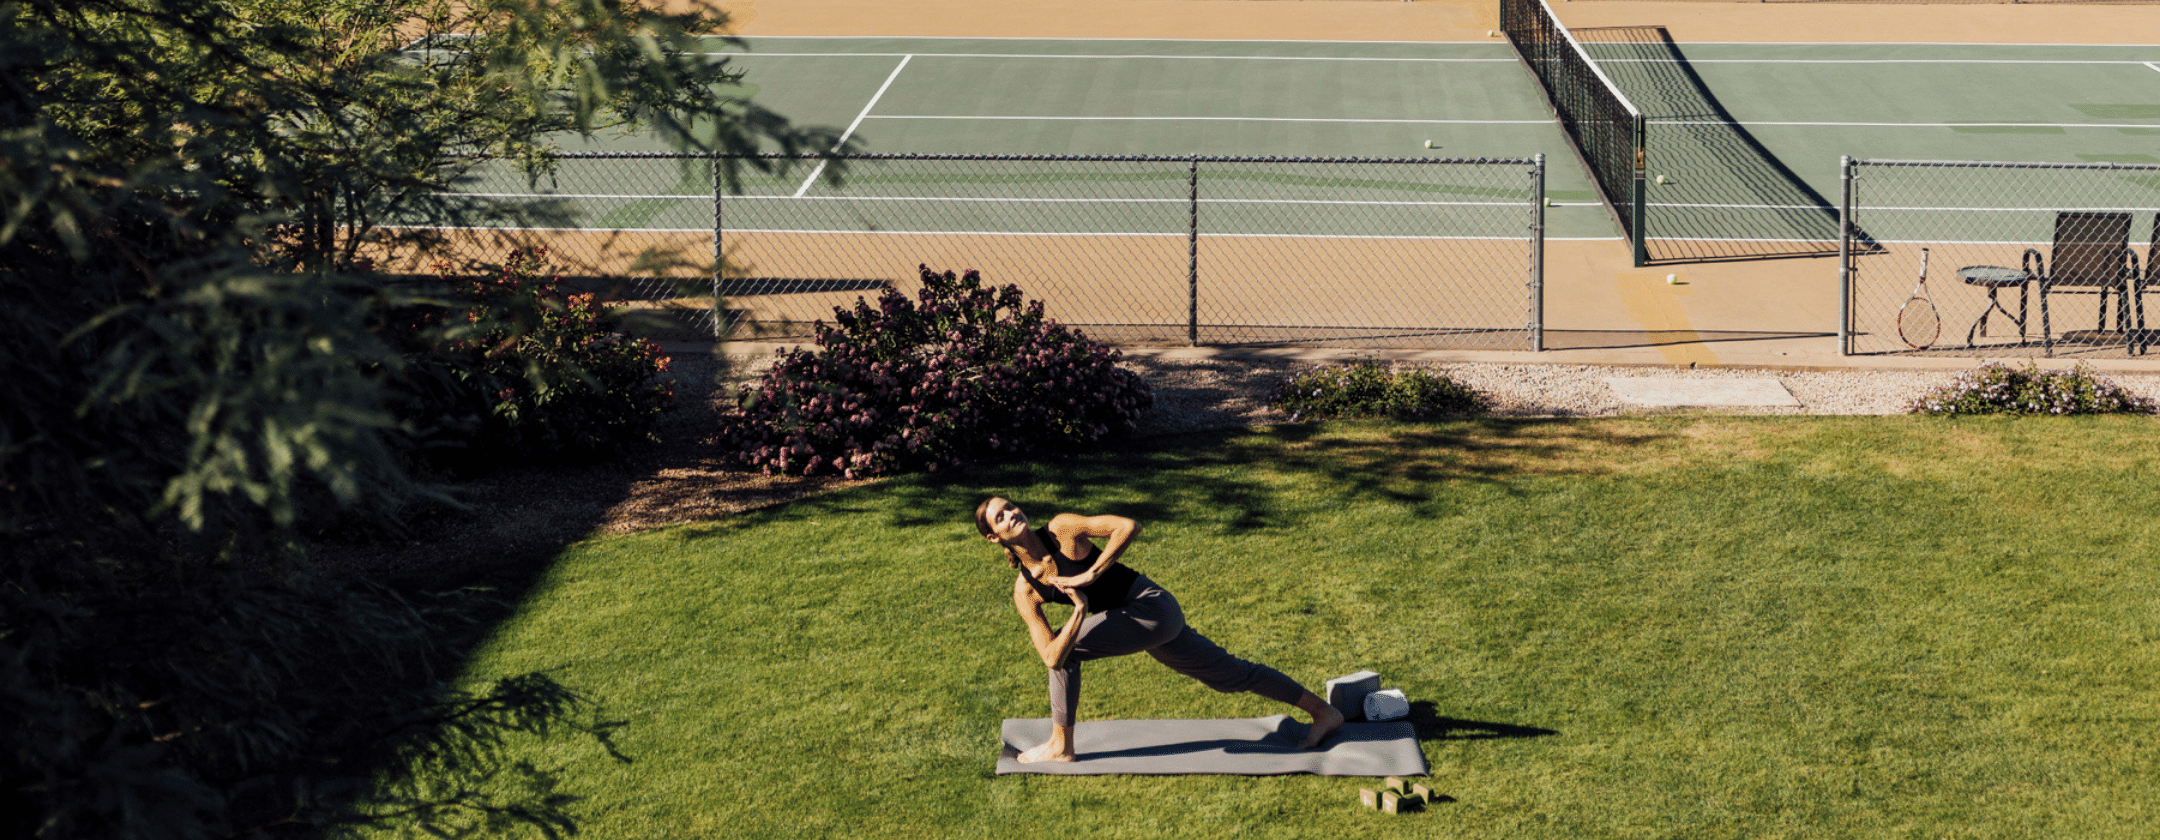 yoga and tennis courts